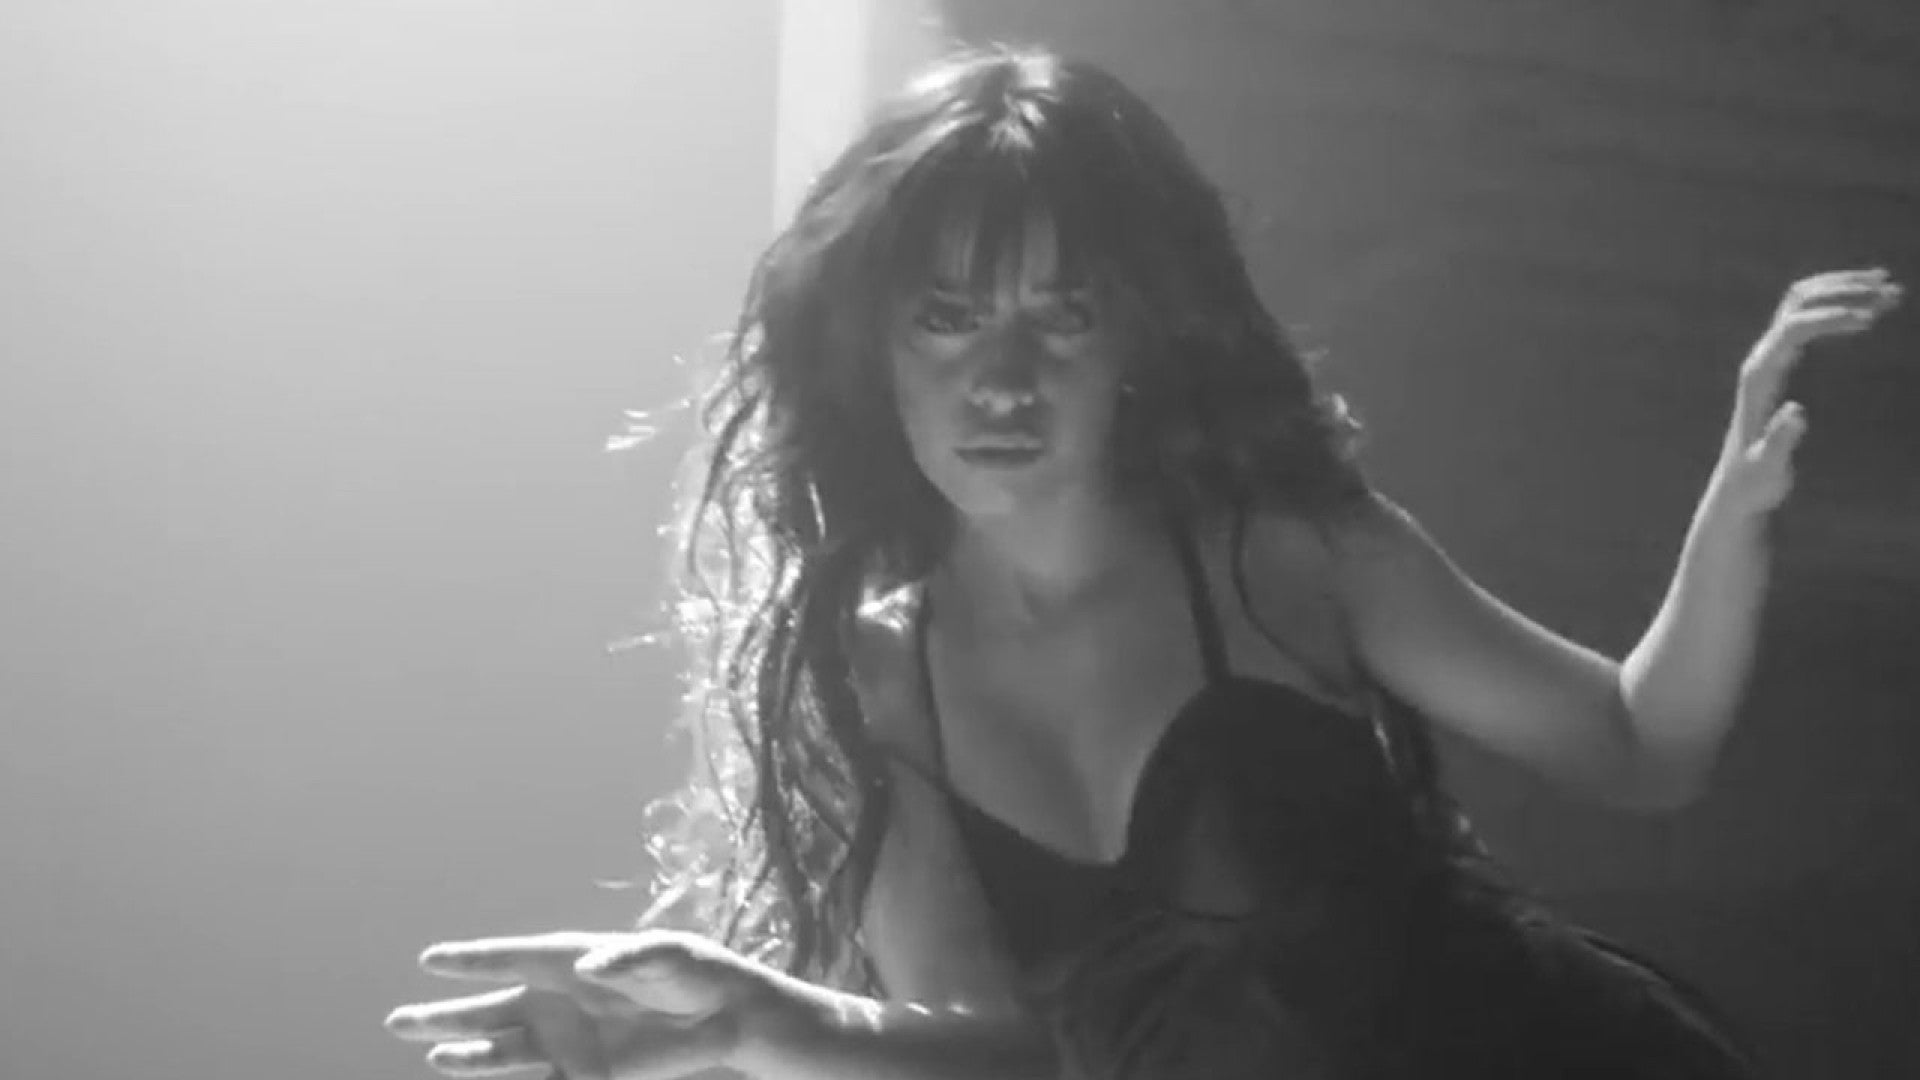 Camila Cabello Shares Music Video For Her Solo Debut 'Crying in the Club'  -- Watch the Sultry Video | Entertainment Tonight